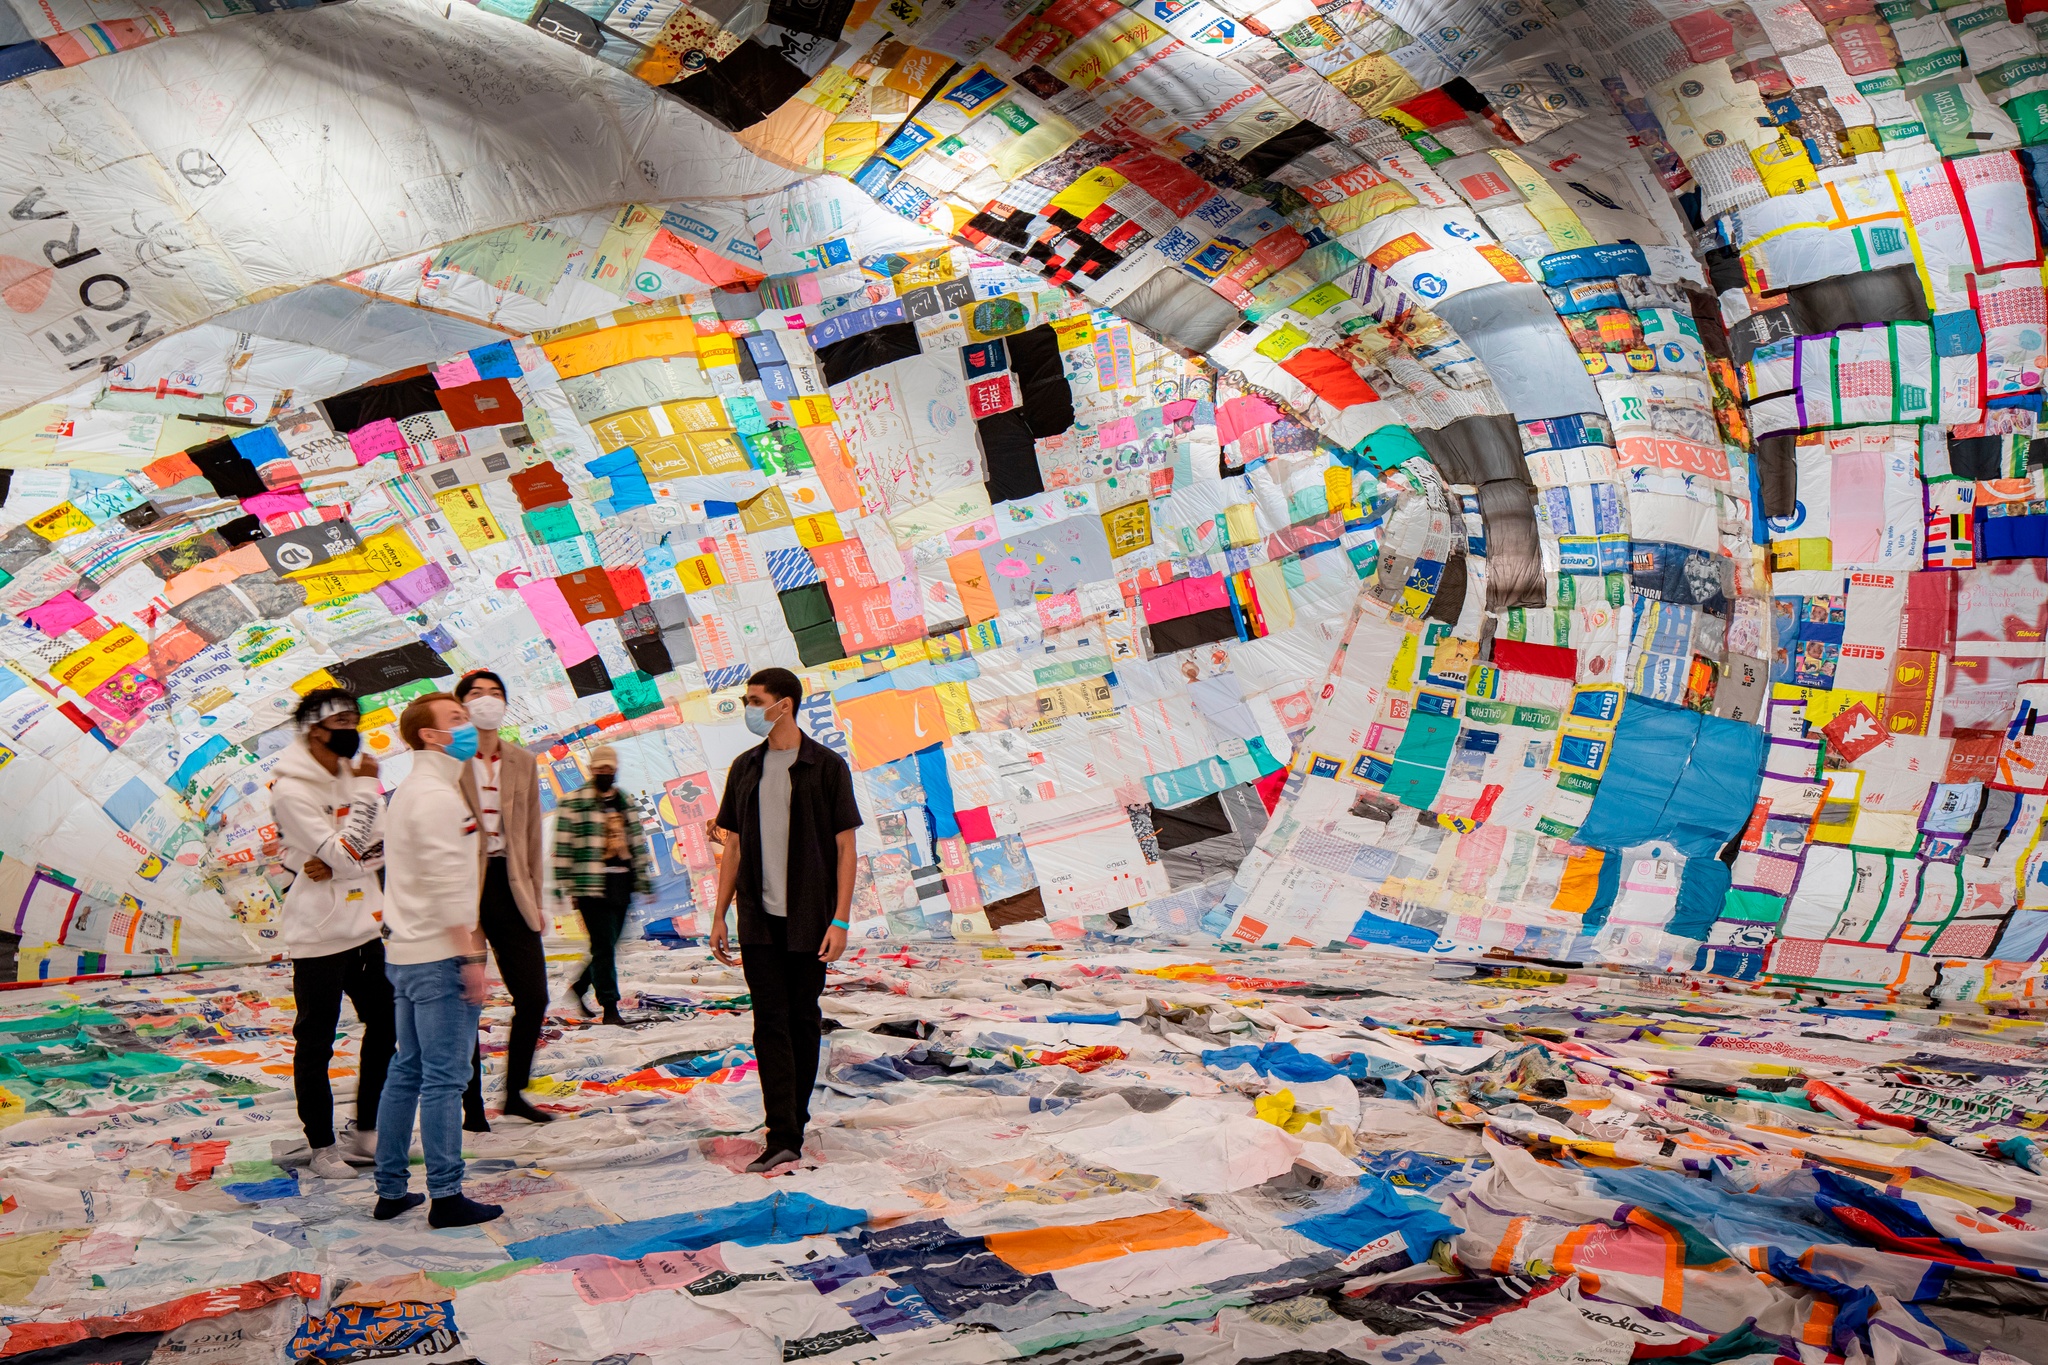 Five people stand inside a cavernous ballon made of a colorful patchwork of reused plastic bags quilted together with tape